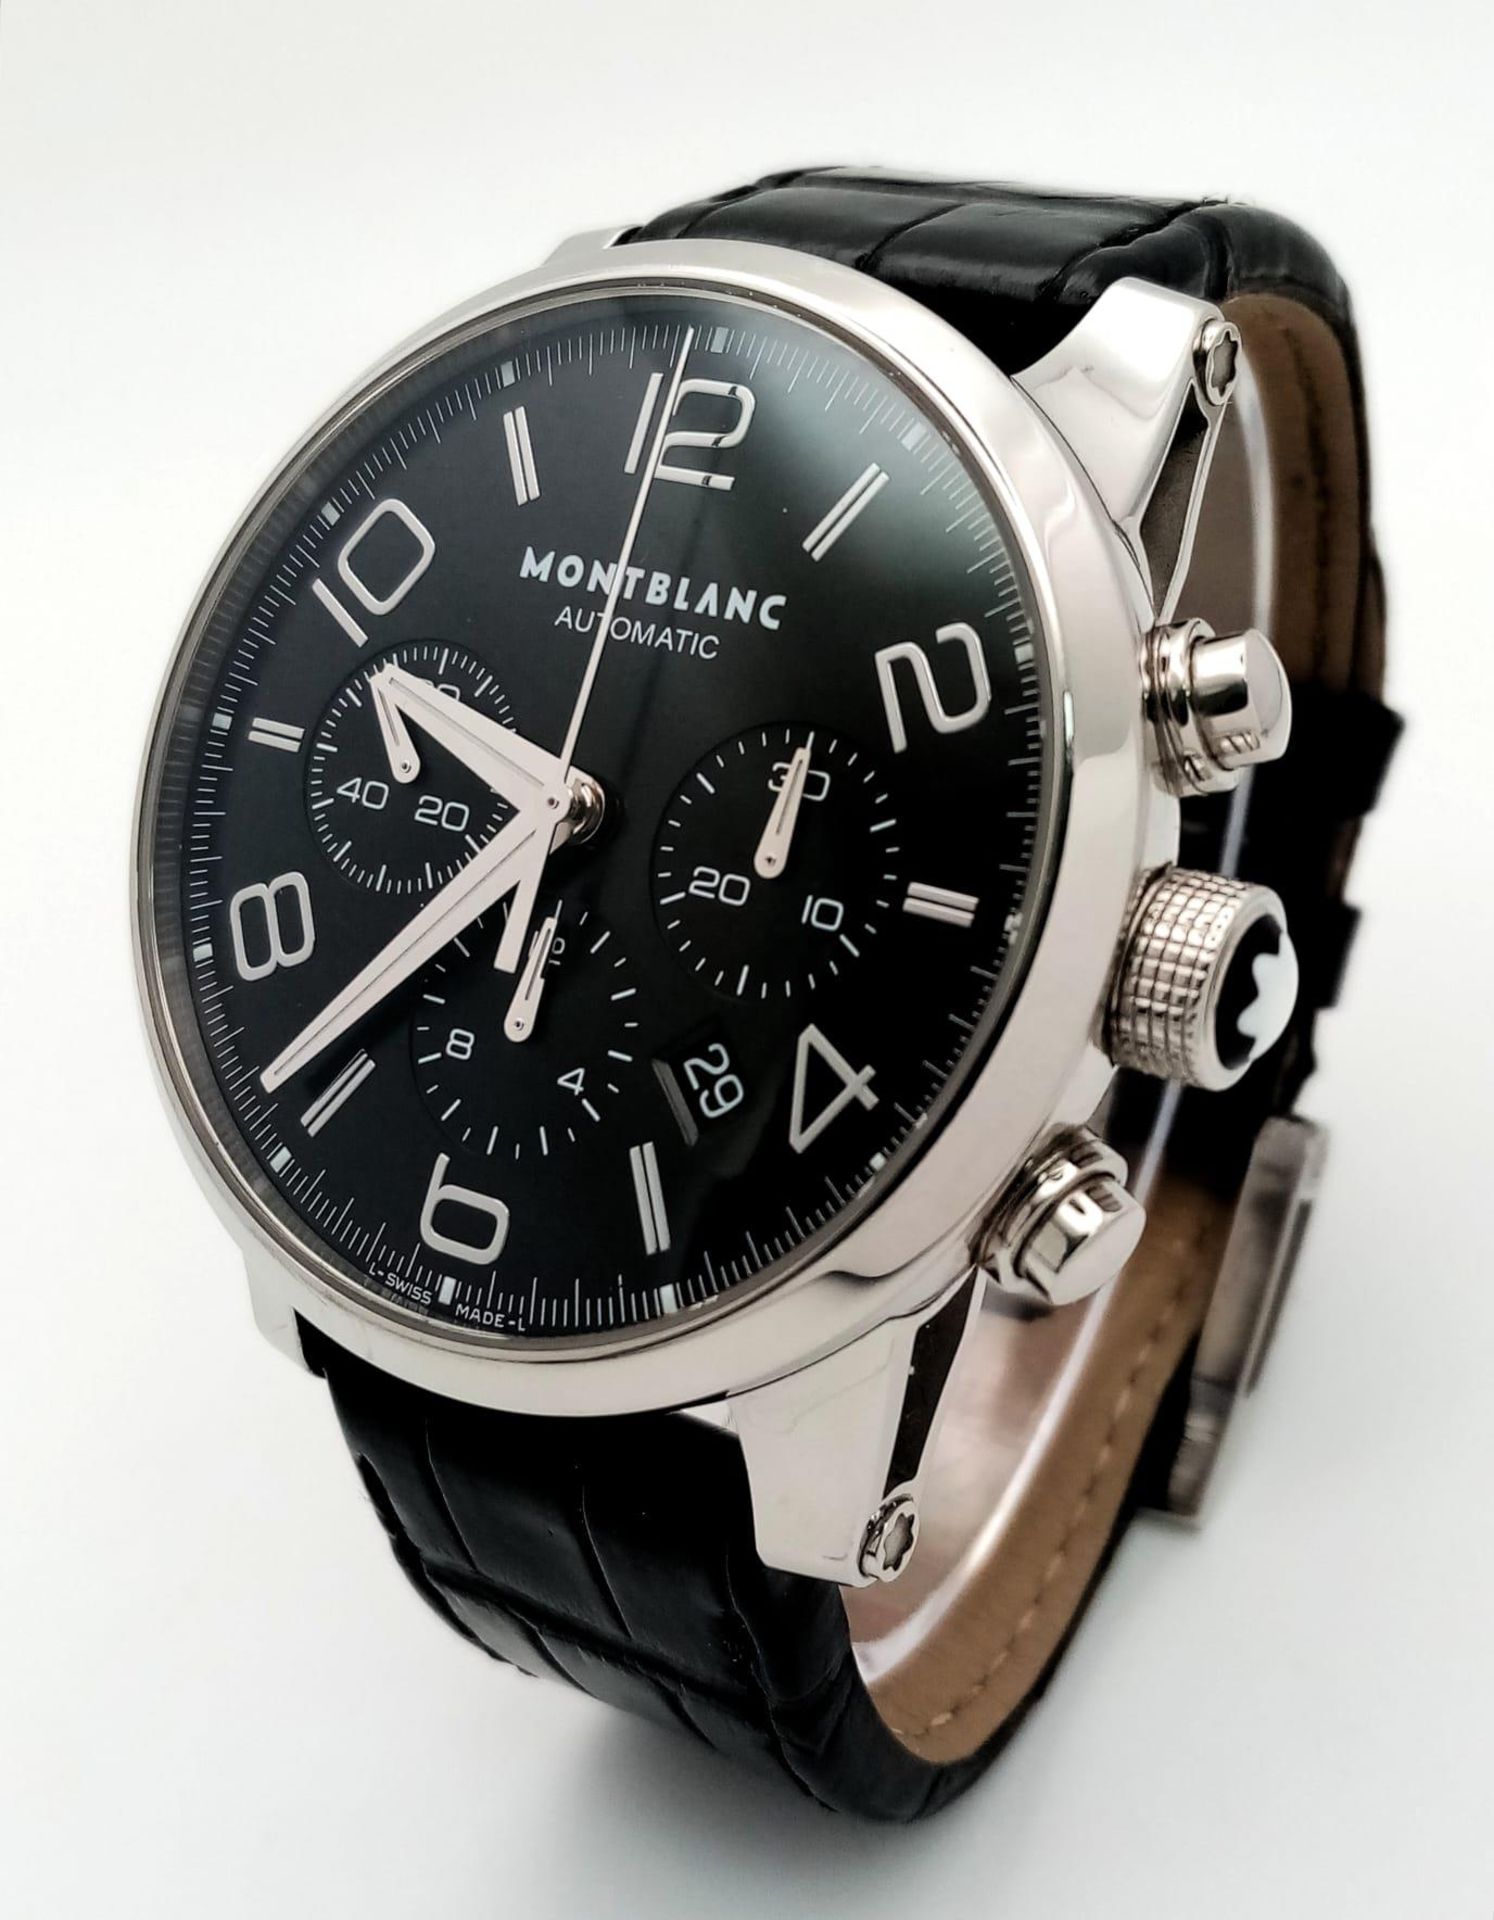 A "MONTBLANC" AUTOMATIC CHRONOGRAPH WITH 3 SUBDIALS ,STUNNING BLACK FACE , COMES WITH BOX AND